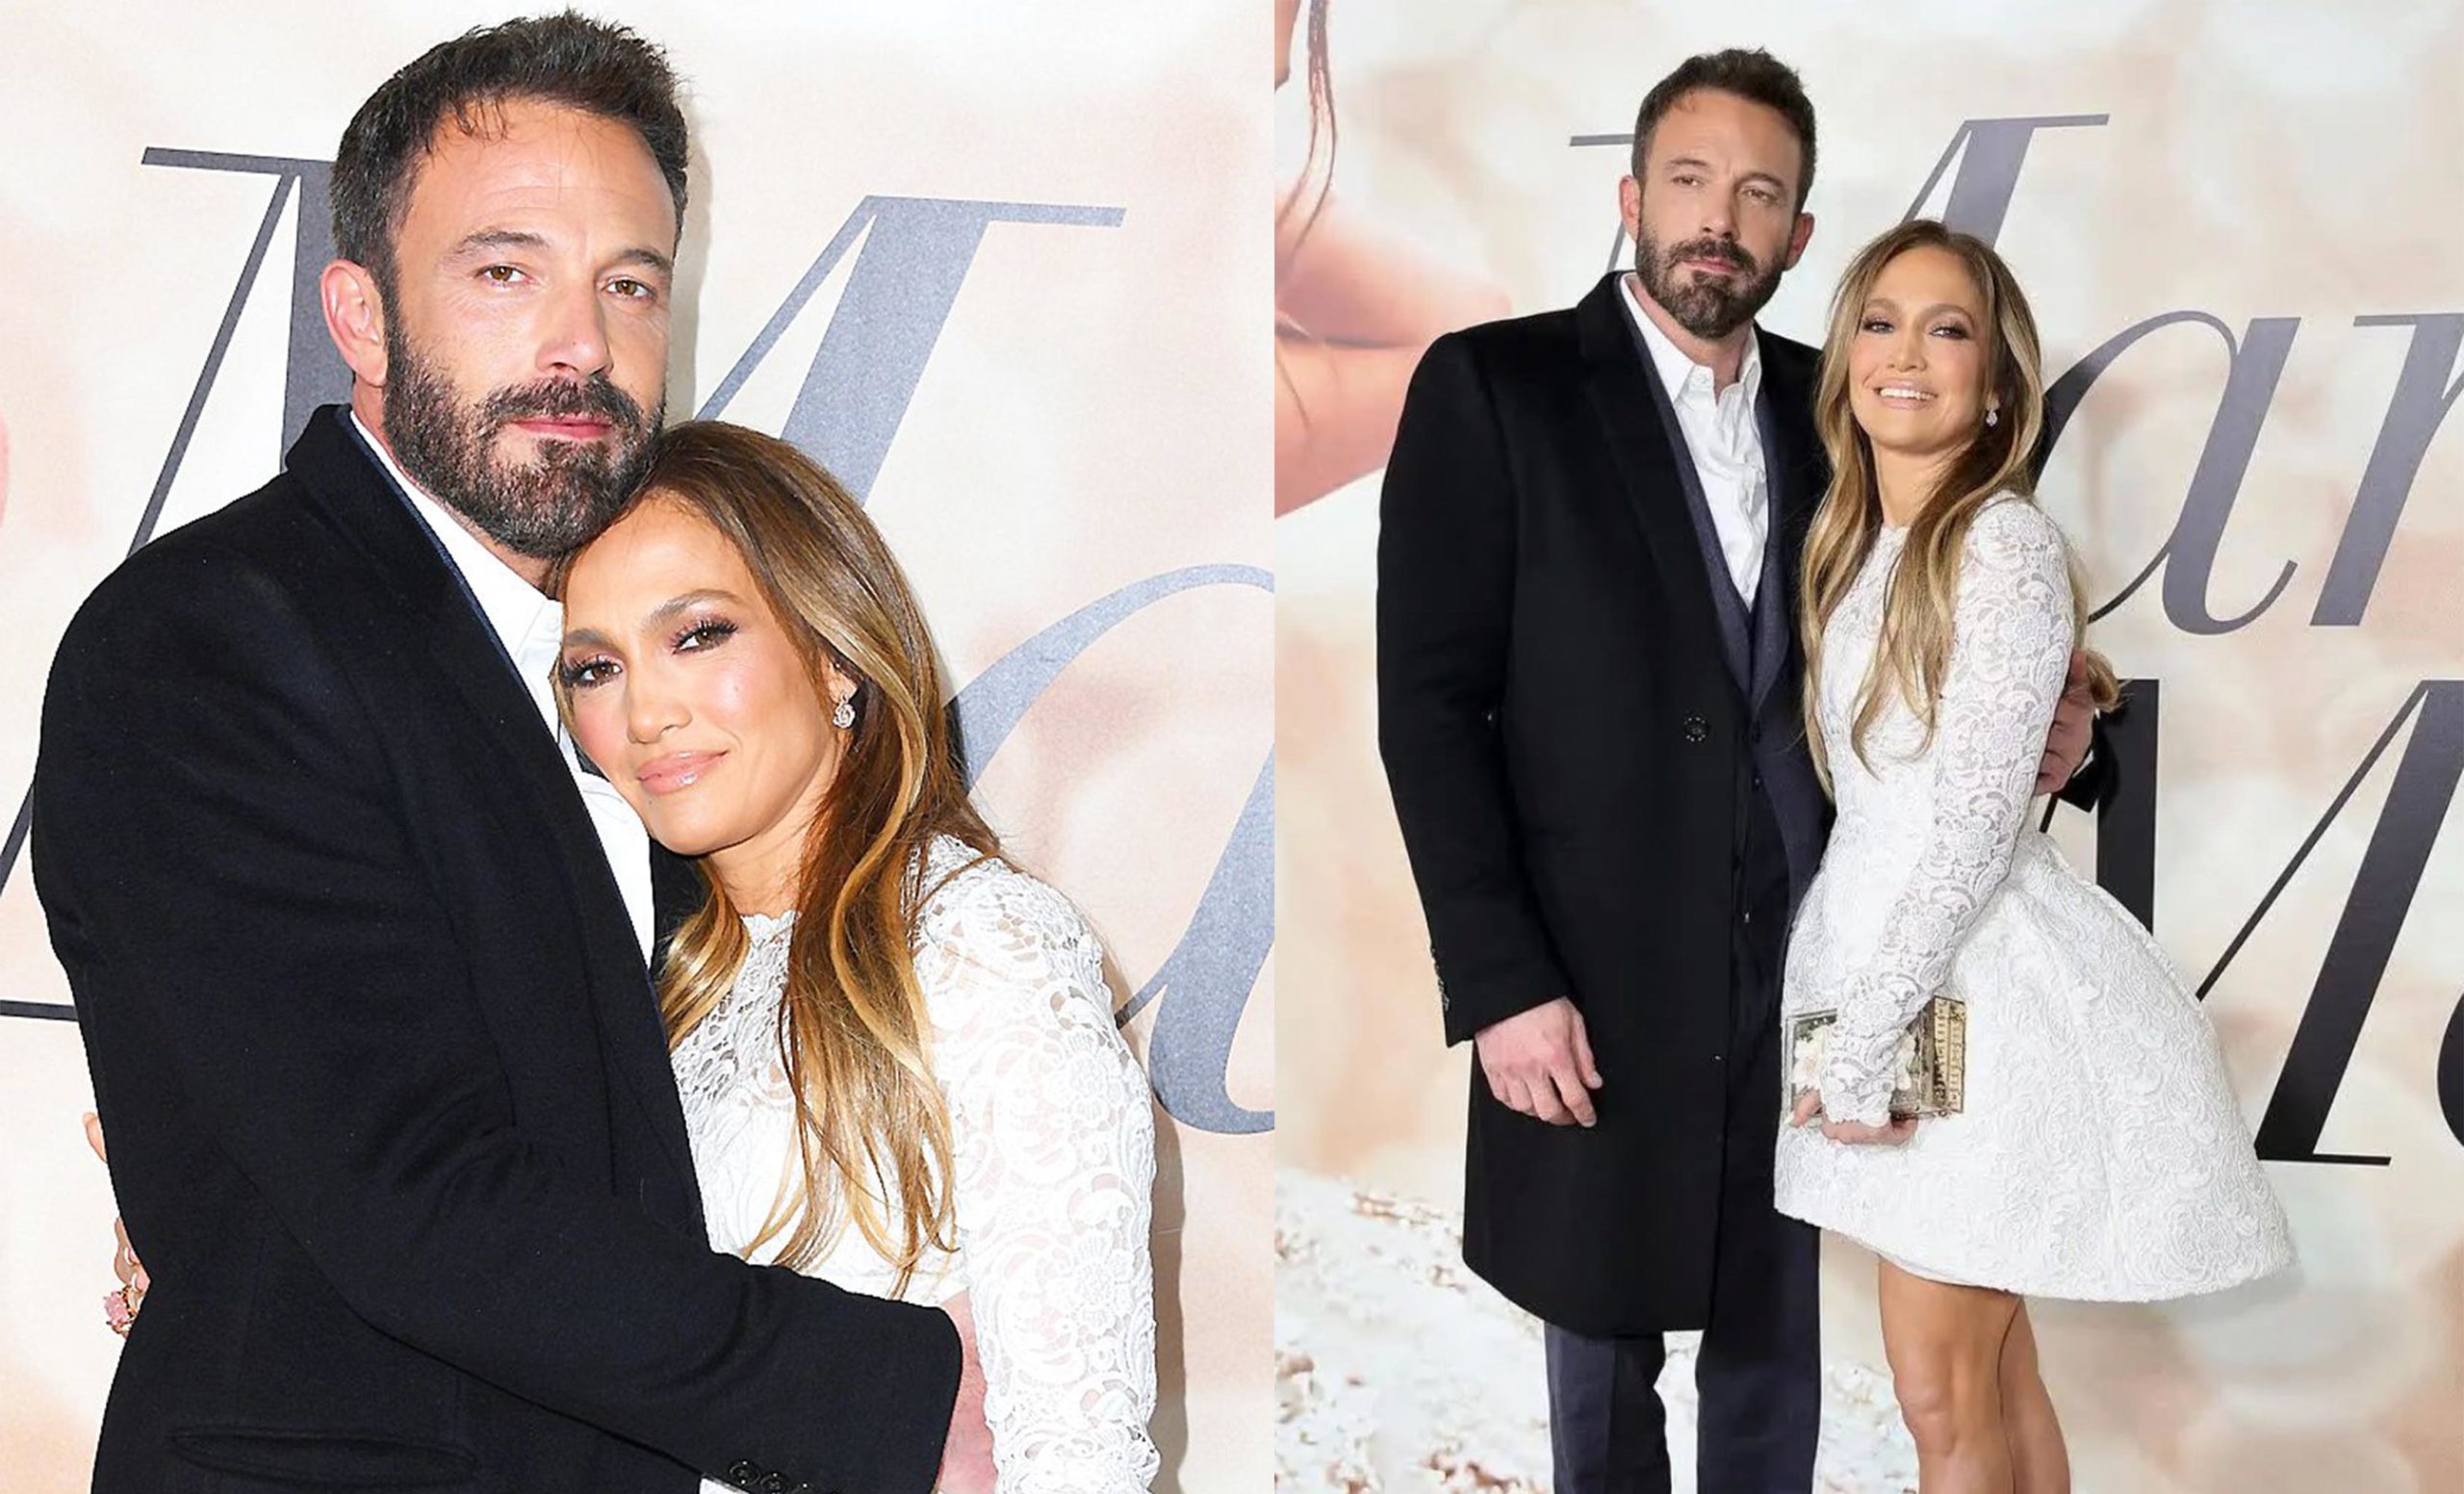 We Want Someone To Look At Us The Way Ben Affleck Looks At Jennifer Lopez In These Cute Images From ‘Marry Me’ Screening